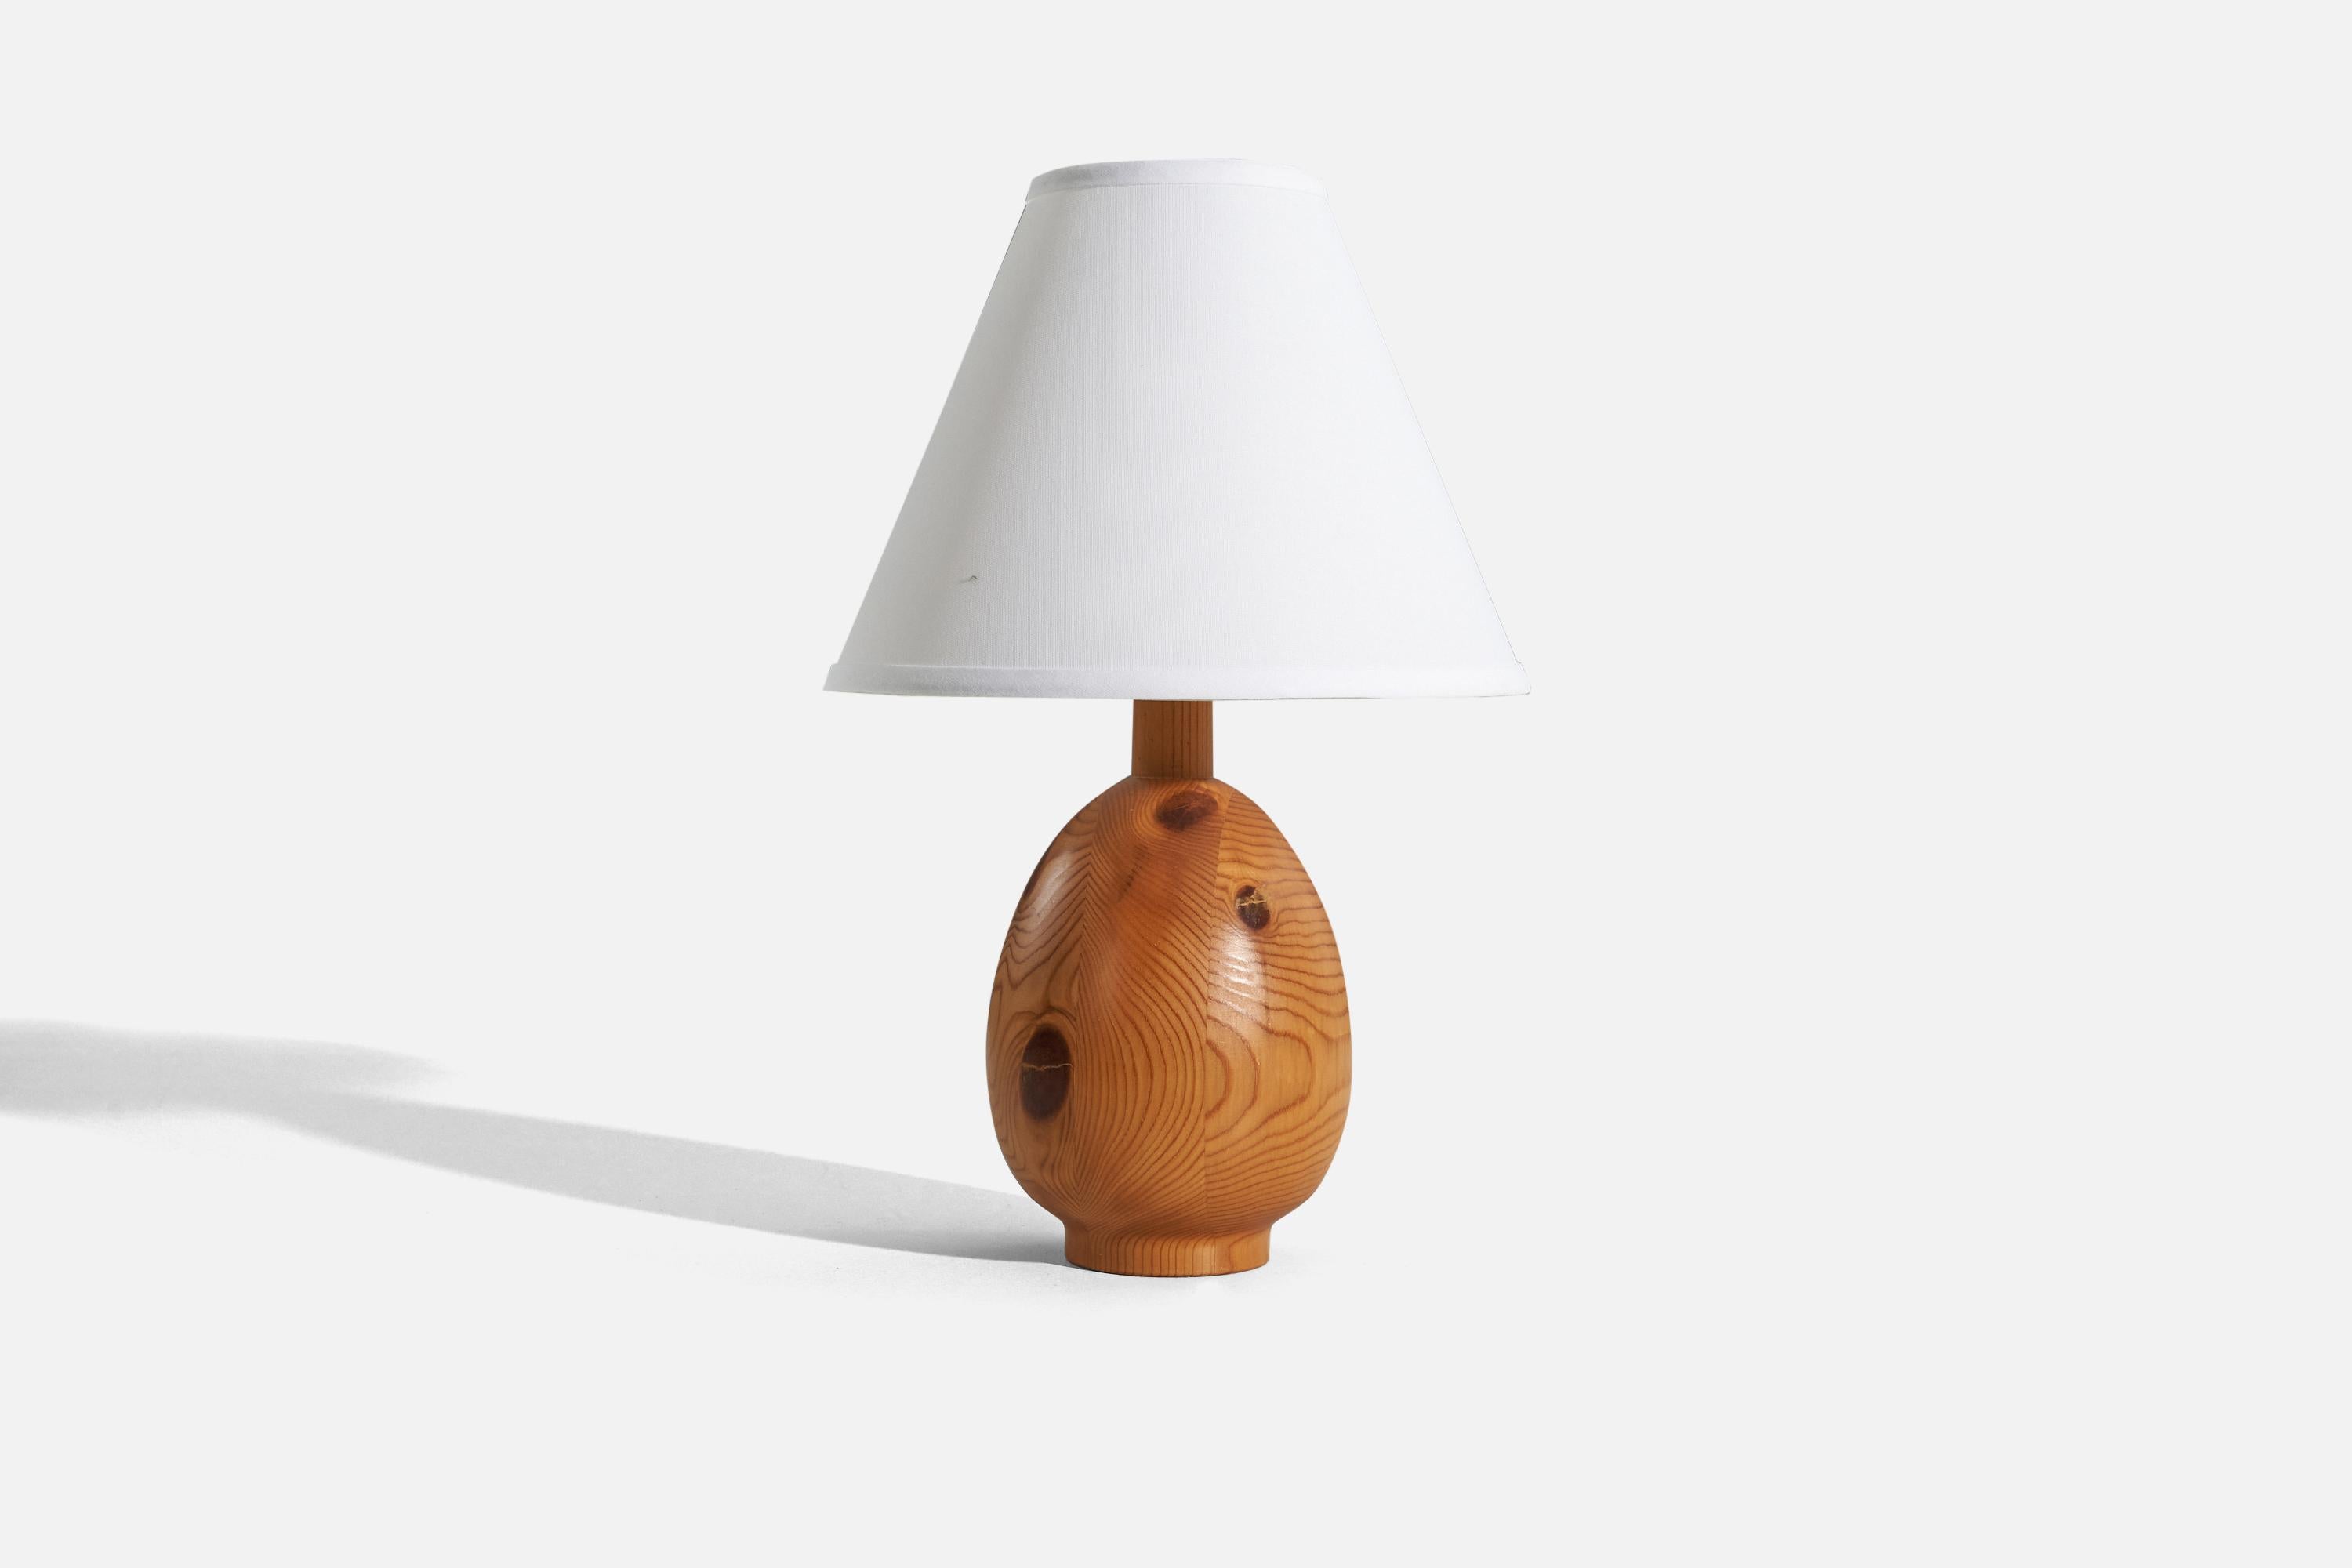 A solid pine table lamp designed and produced by Markslöjd, Kinna, Sweden, c. 1970s.

Sold without lampshade. 
Dimensions of lamp (inches) : 11.3125 x 5.375 x 5.375 (H x W x D) 
Dimensions of shade (inches) : 4 x 10 x 8 (T x B x H) 
Dimension